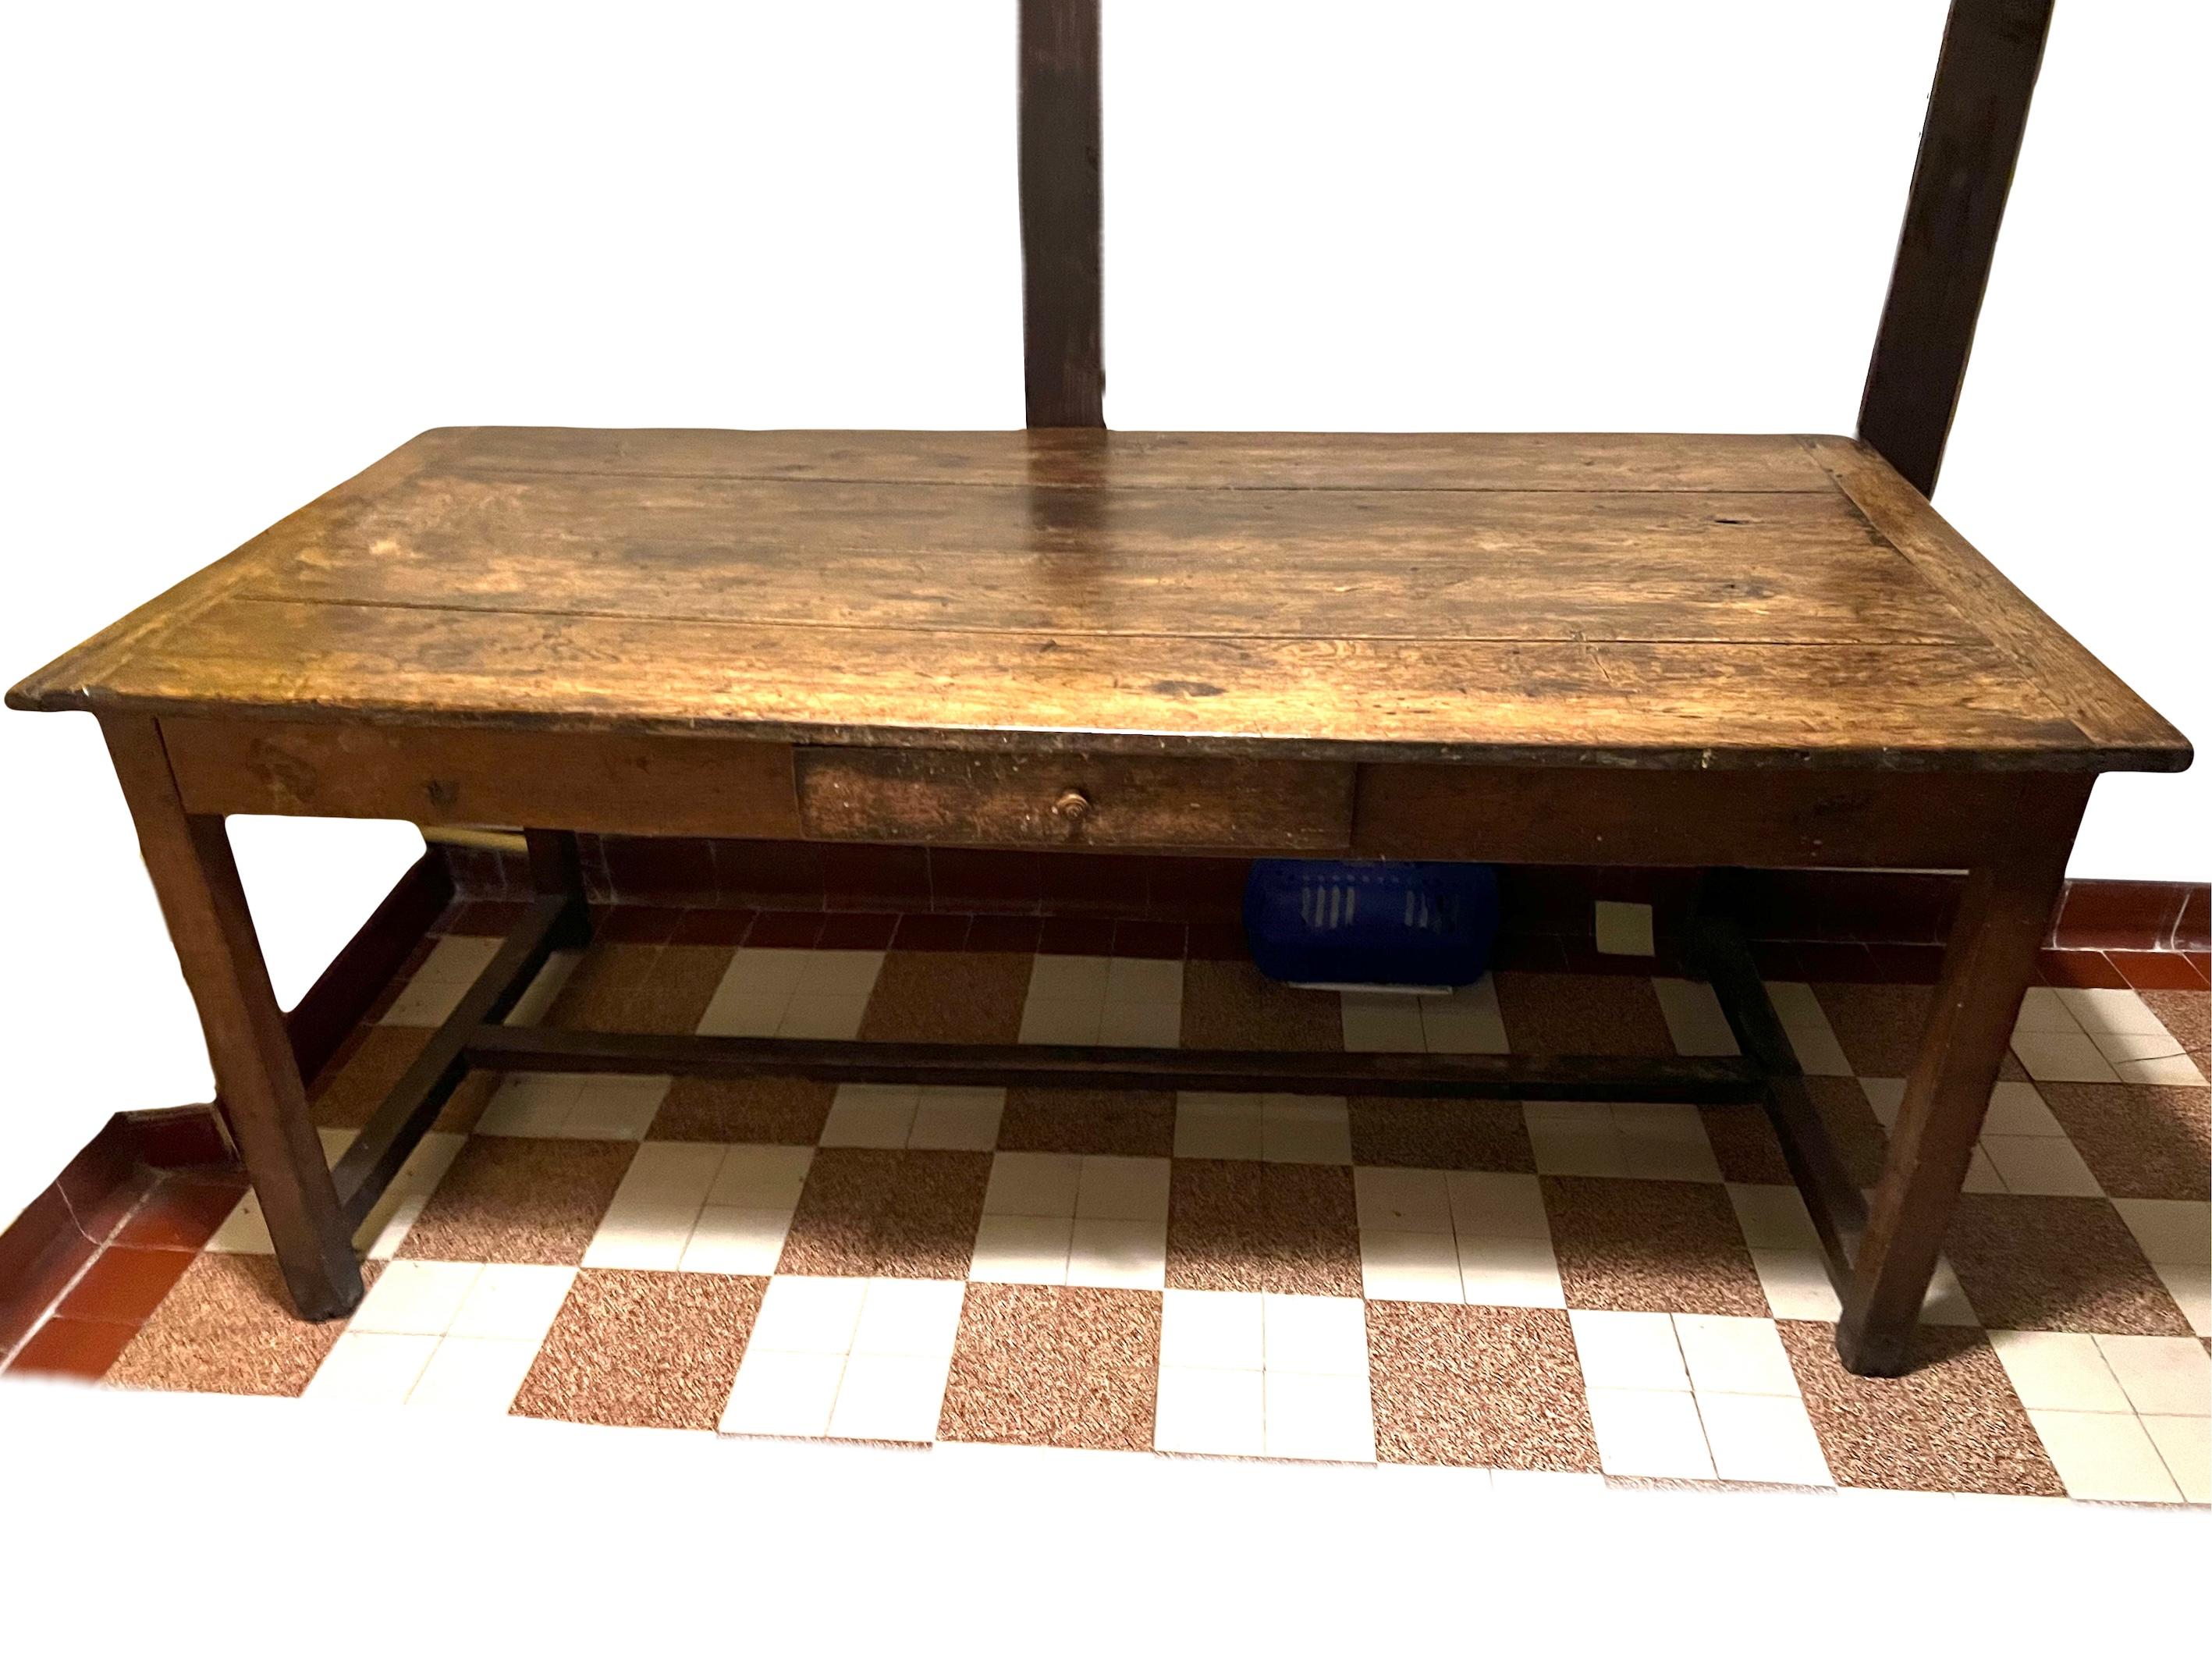 Period table, imbued with a rustic elegance that evokes the charm of grand farmhouse or monastic tables from yesteryears. Its naturally aged patina, beautifully worn, reveals a lengthwise drawer and another widthwise, even providing the option to